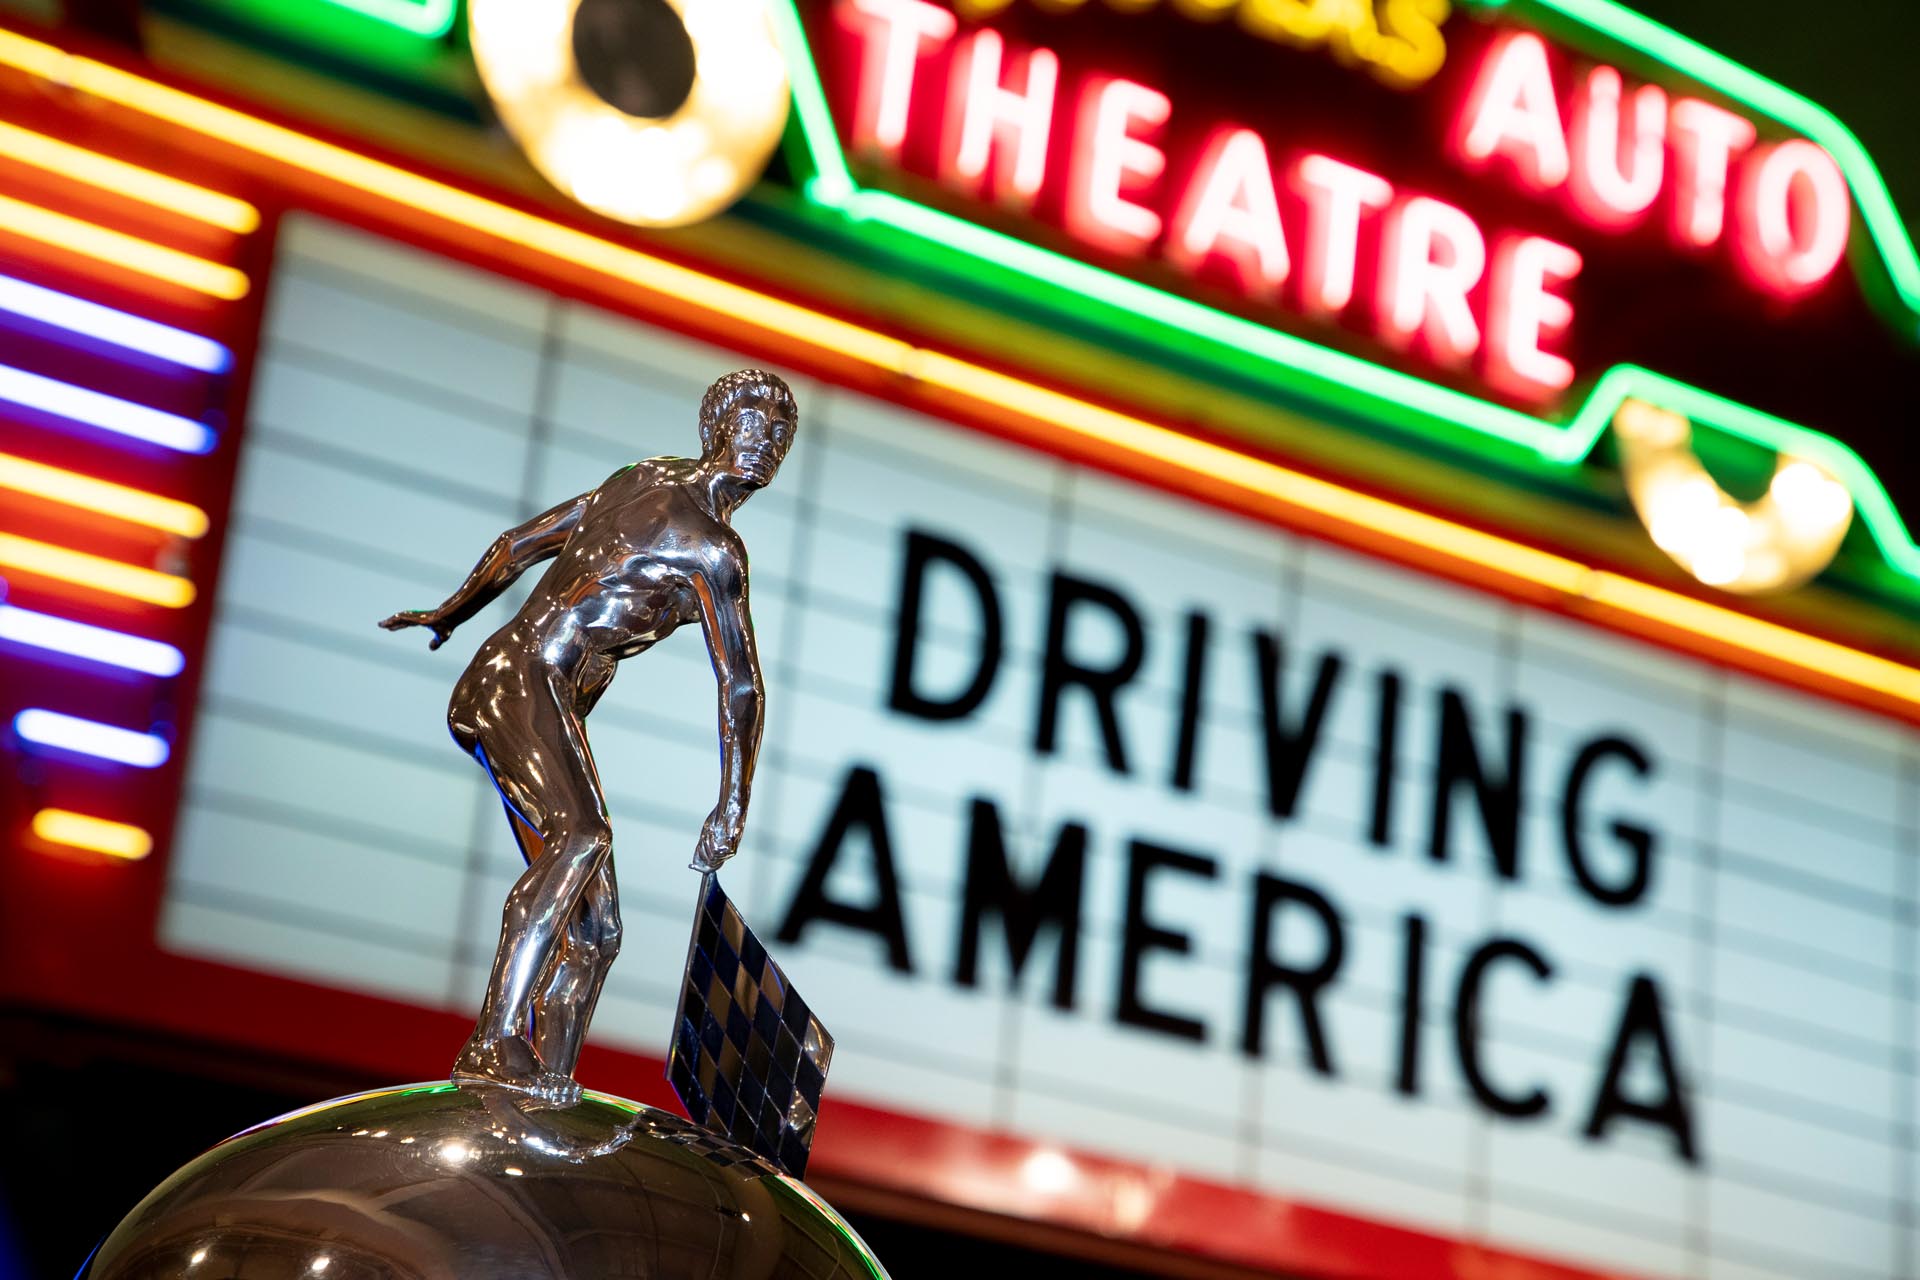 Metal man on large silver trophy in front of marquee sign